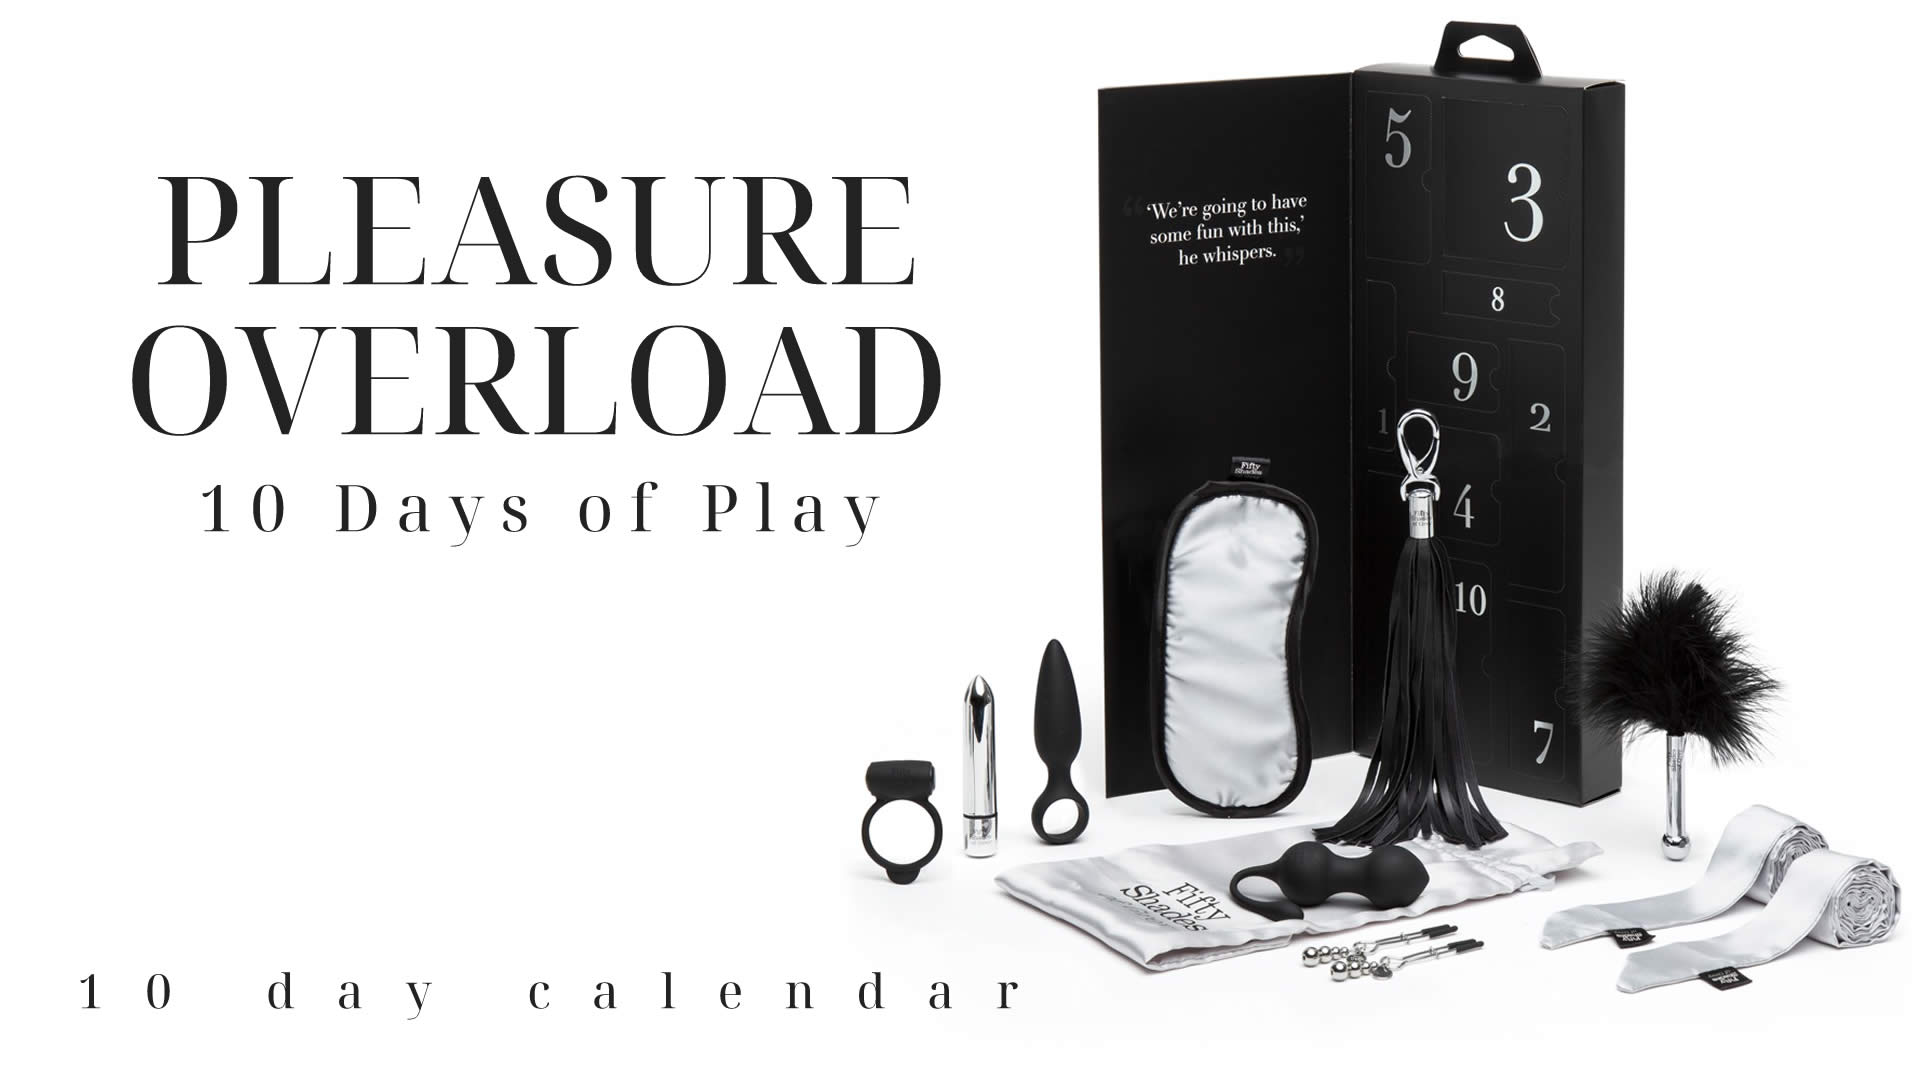 Pleasure Overload Surprise Kalender fra Fifty Shades of Grey